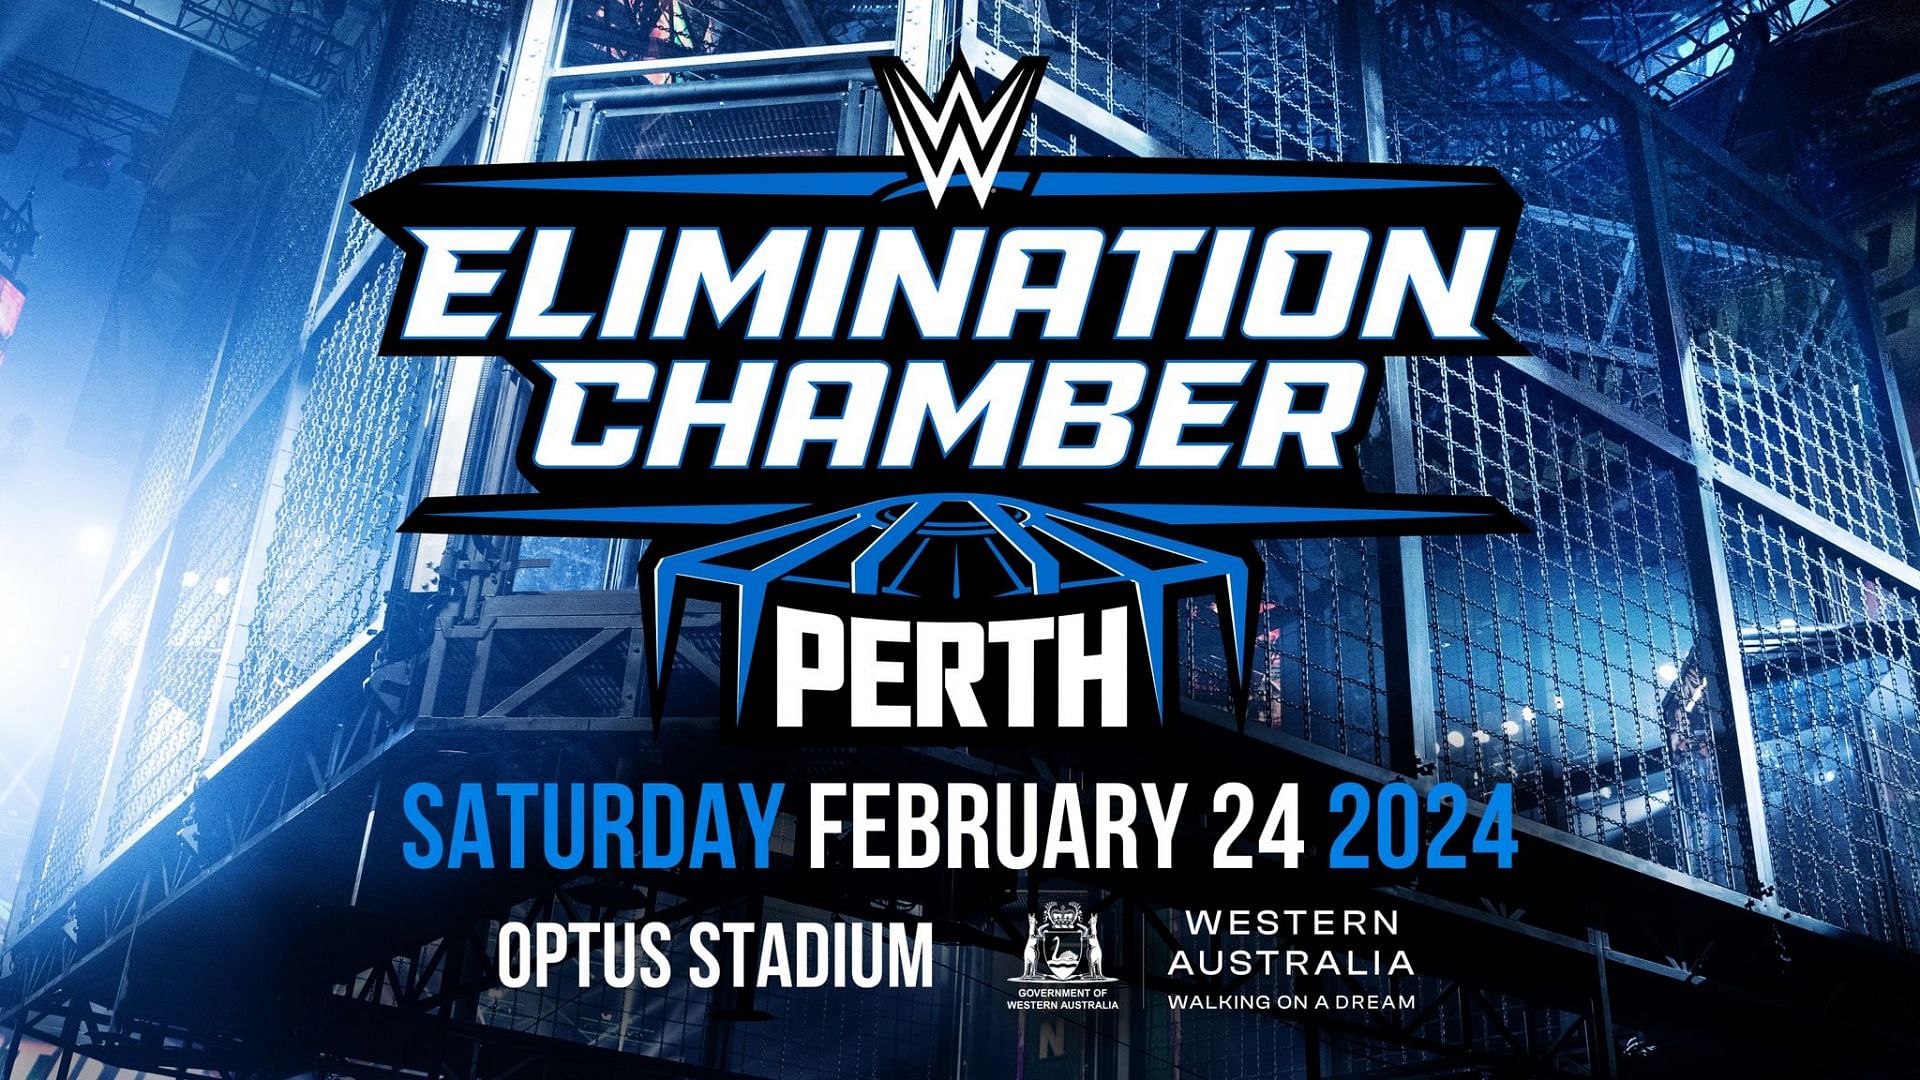 Elimination Chamber: Perth is on February 24 in Australia. 